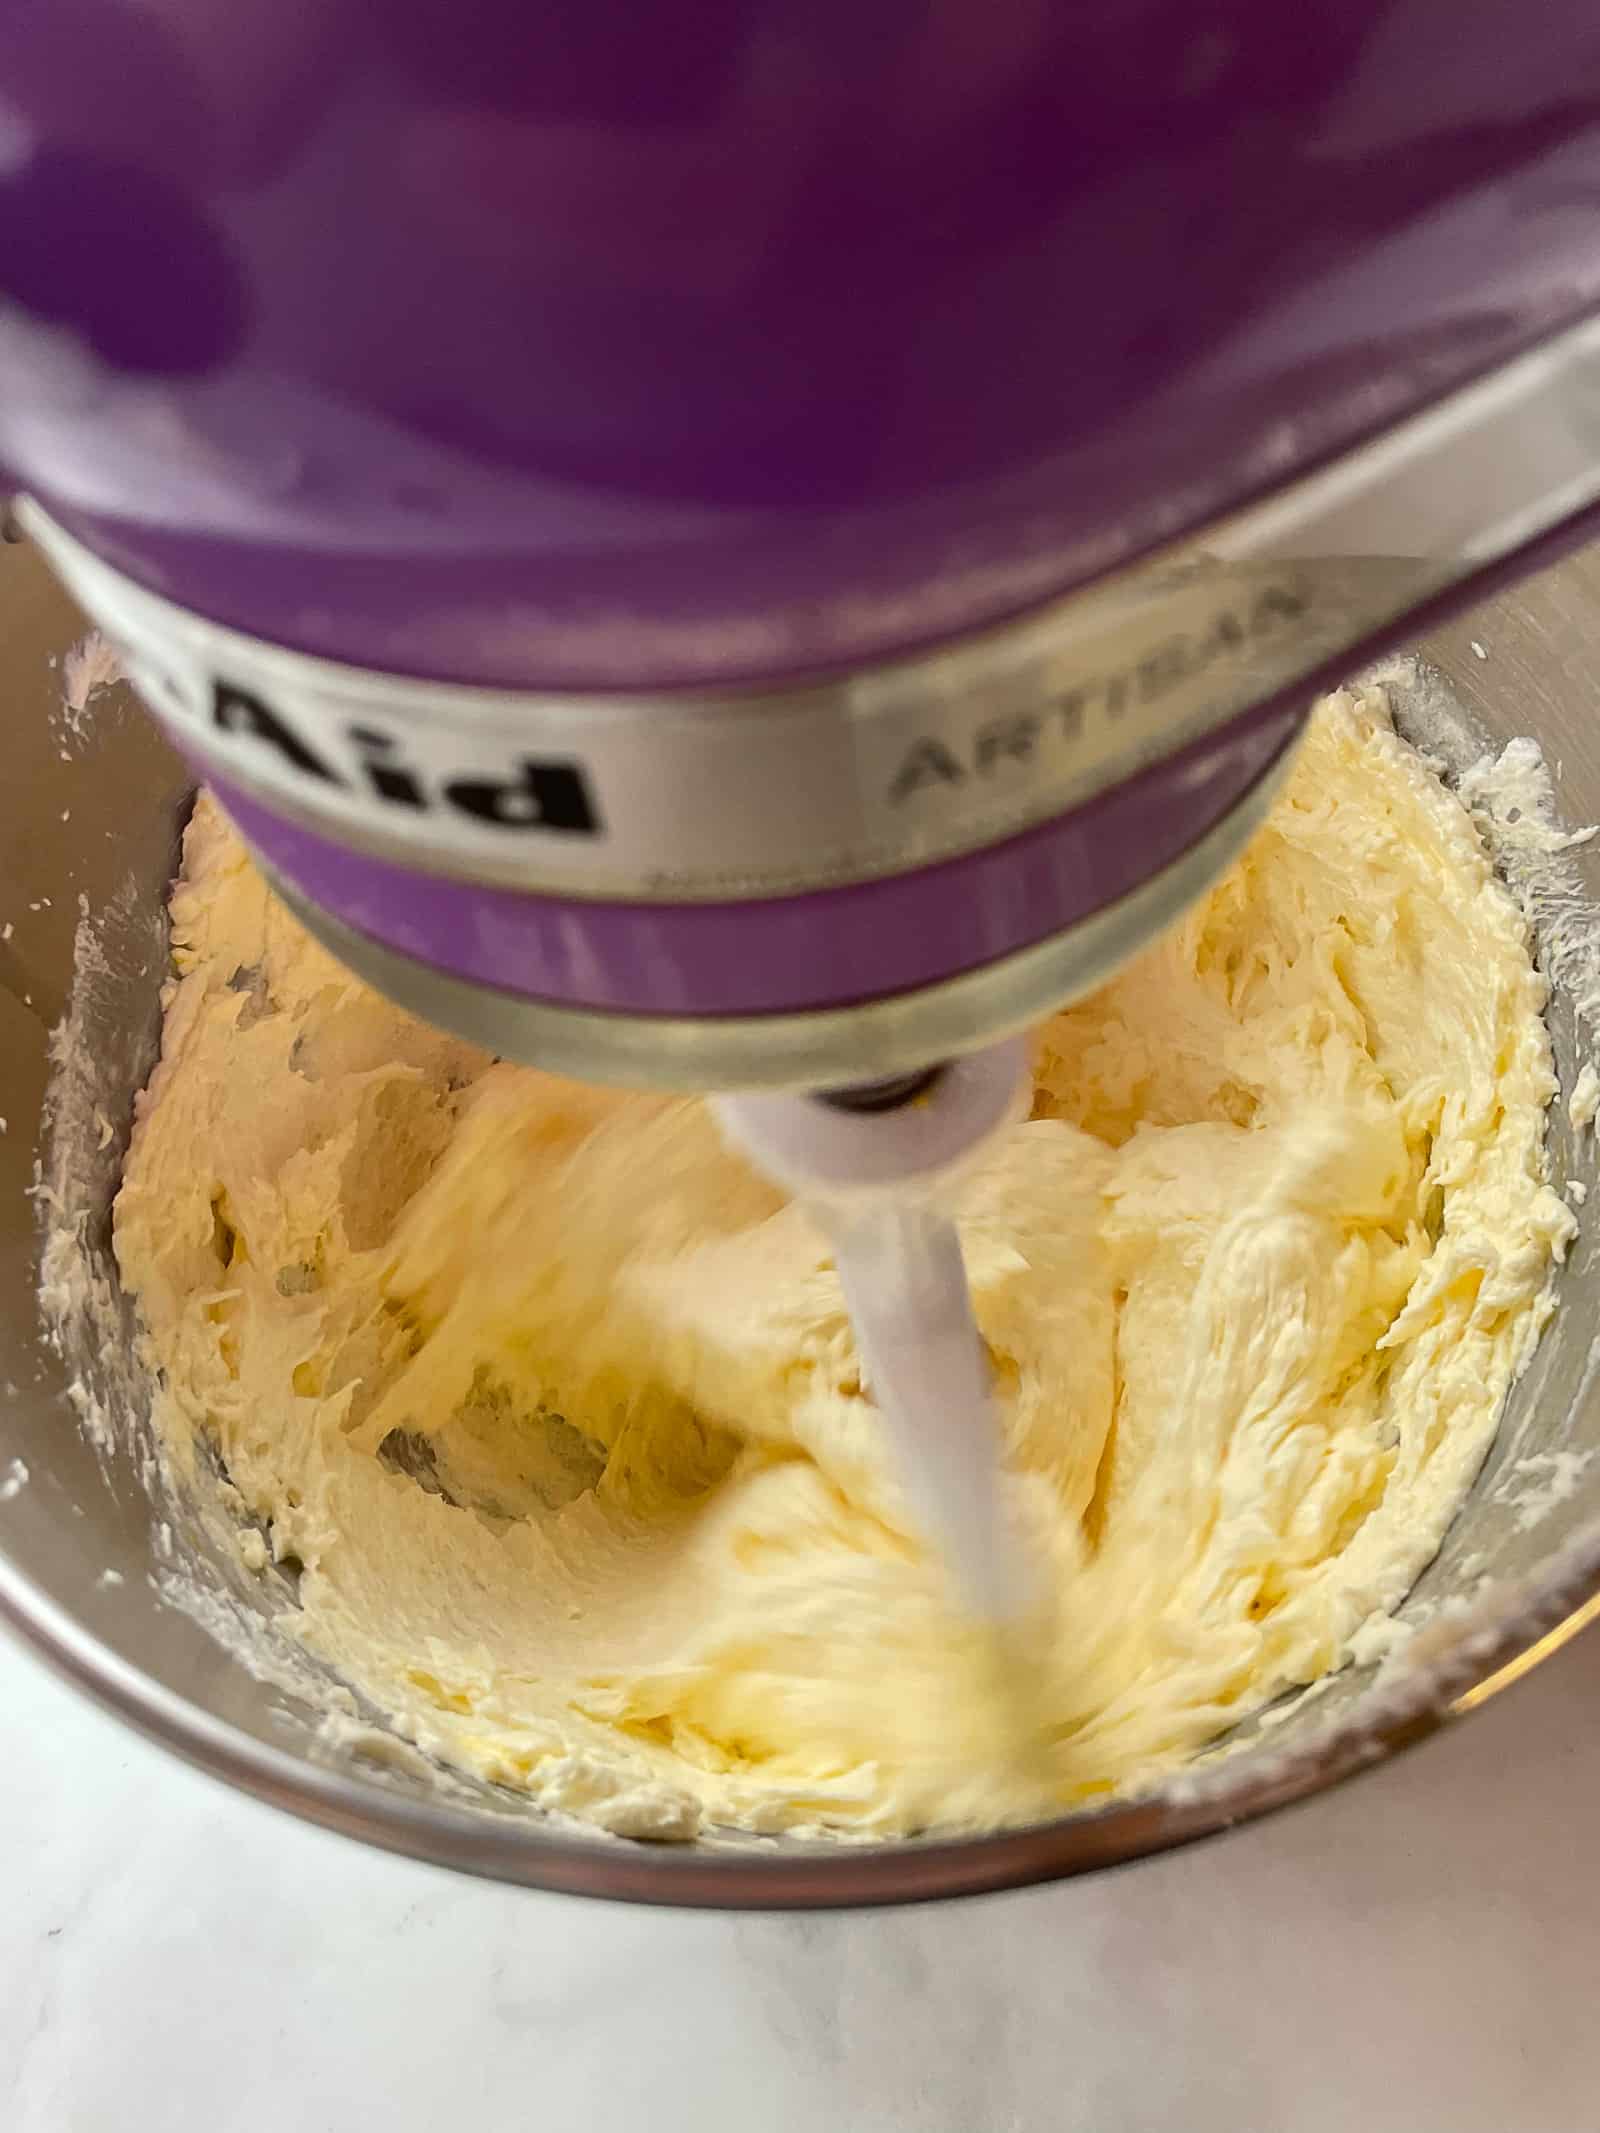 Butter, sugar, egg mixture in mixing bowl.